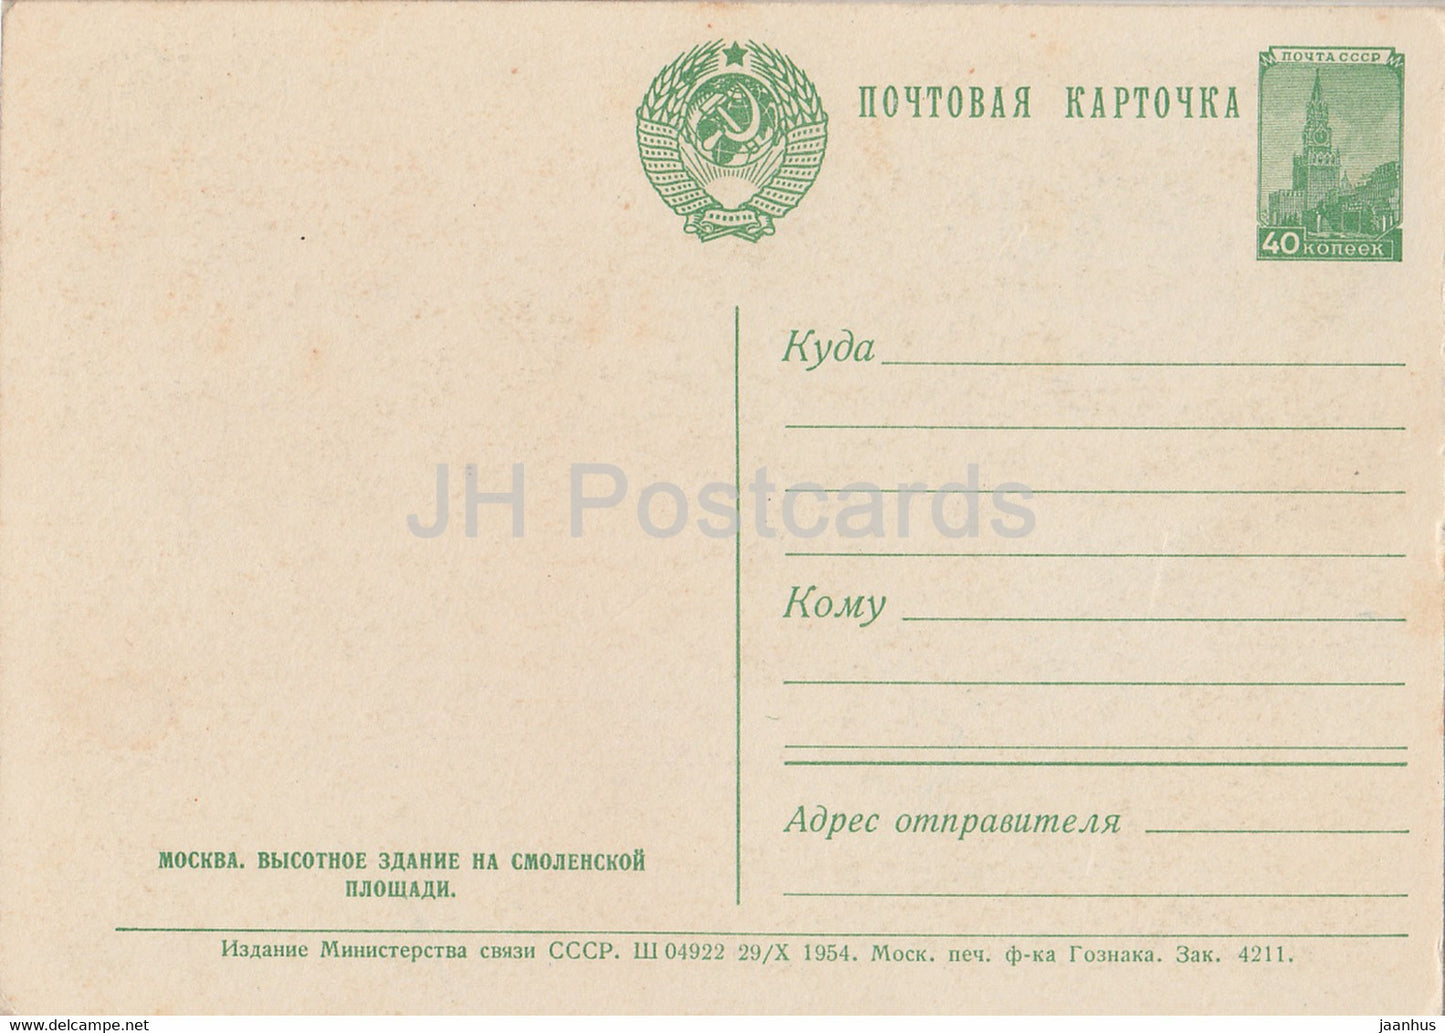 Moscow - High-rise building on Smolenskaya Square - postal stationery - 1954 - Russia USSR - unused